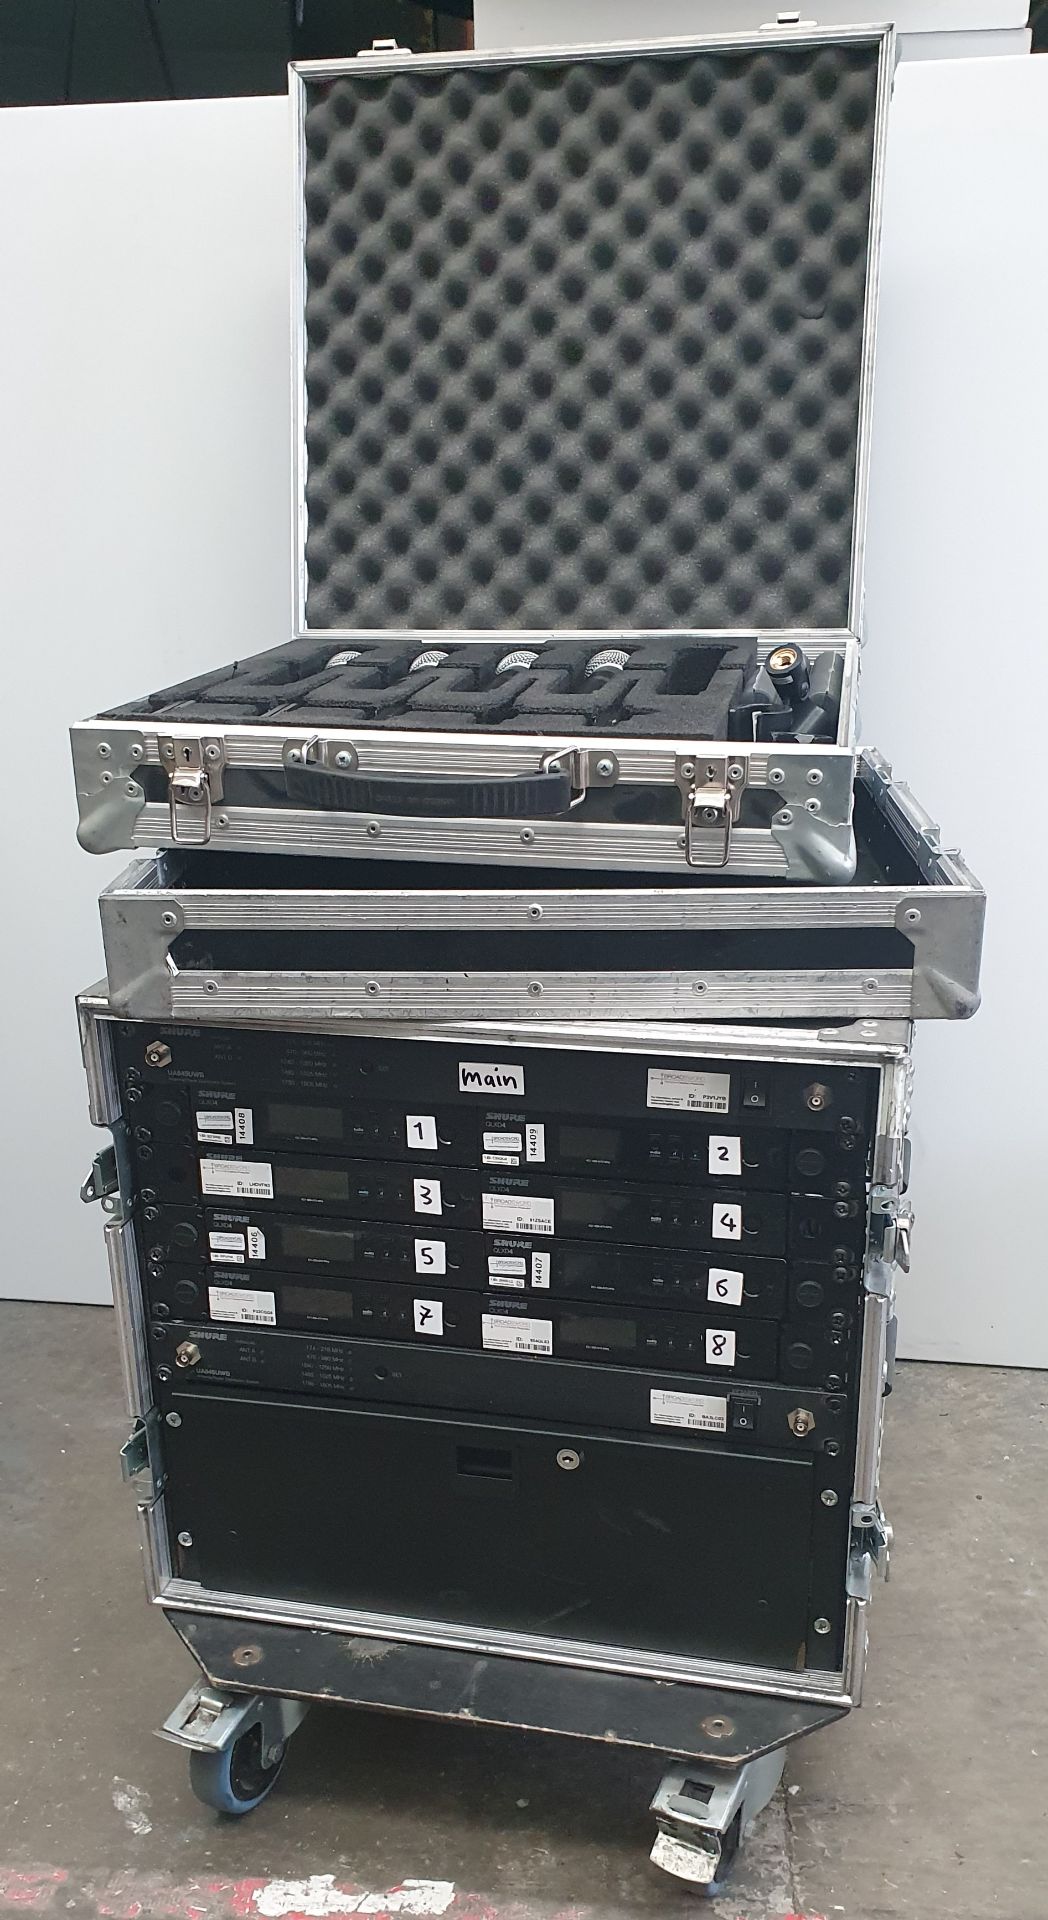 A Shure Microphone Kit comprising: 4 Shure QLXD1 Bodypack Transmitters with 4 Shure QLXD2/SM58